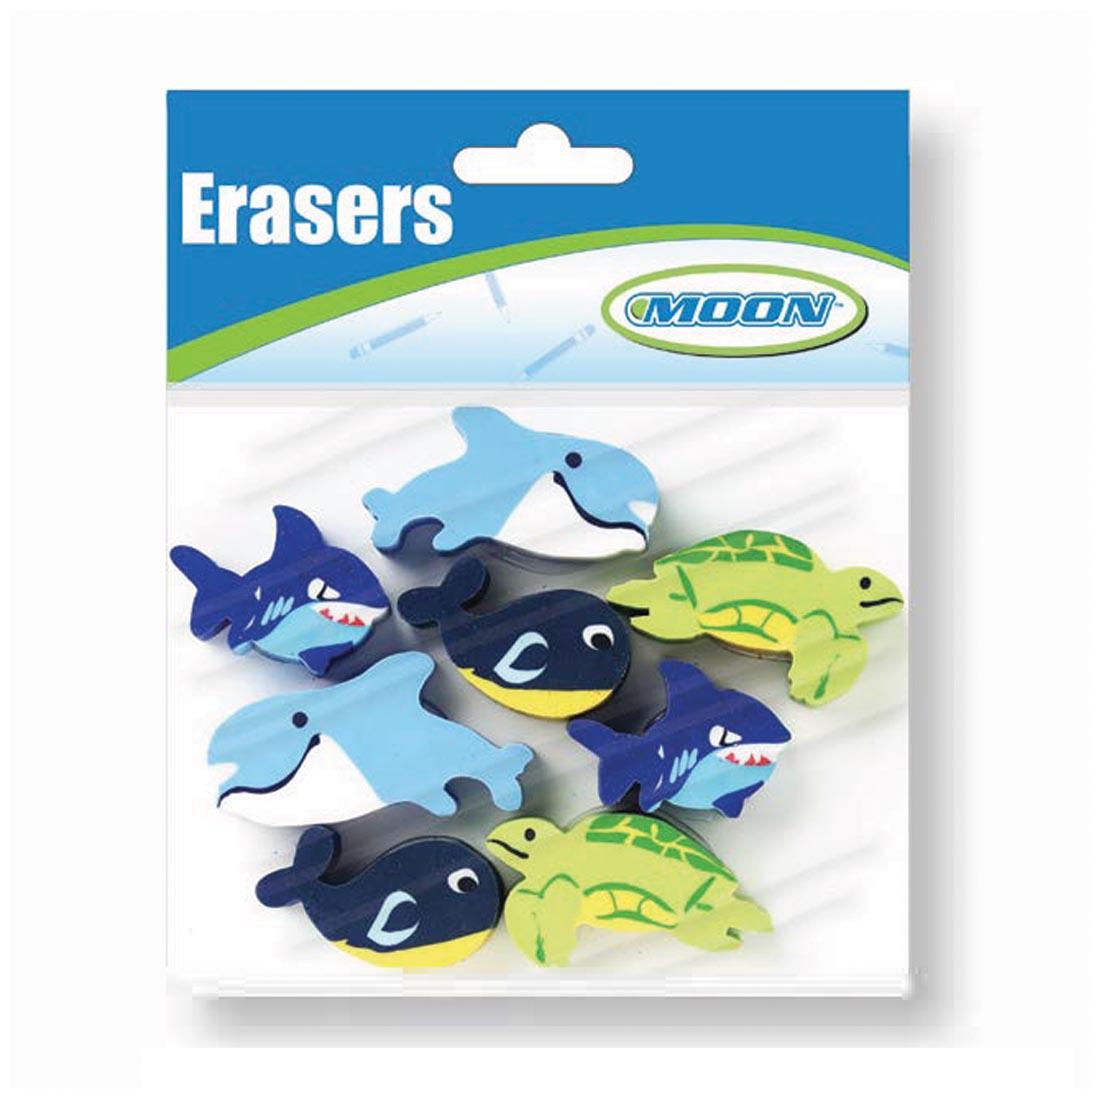 Pencil topper erasers in the shapes of various sea creatures